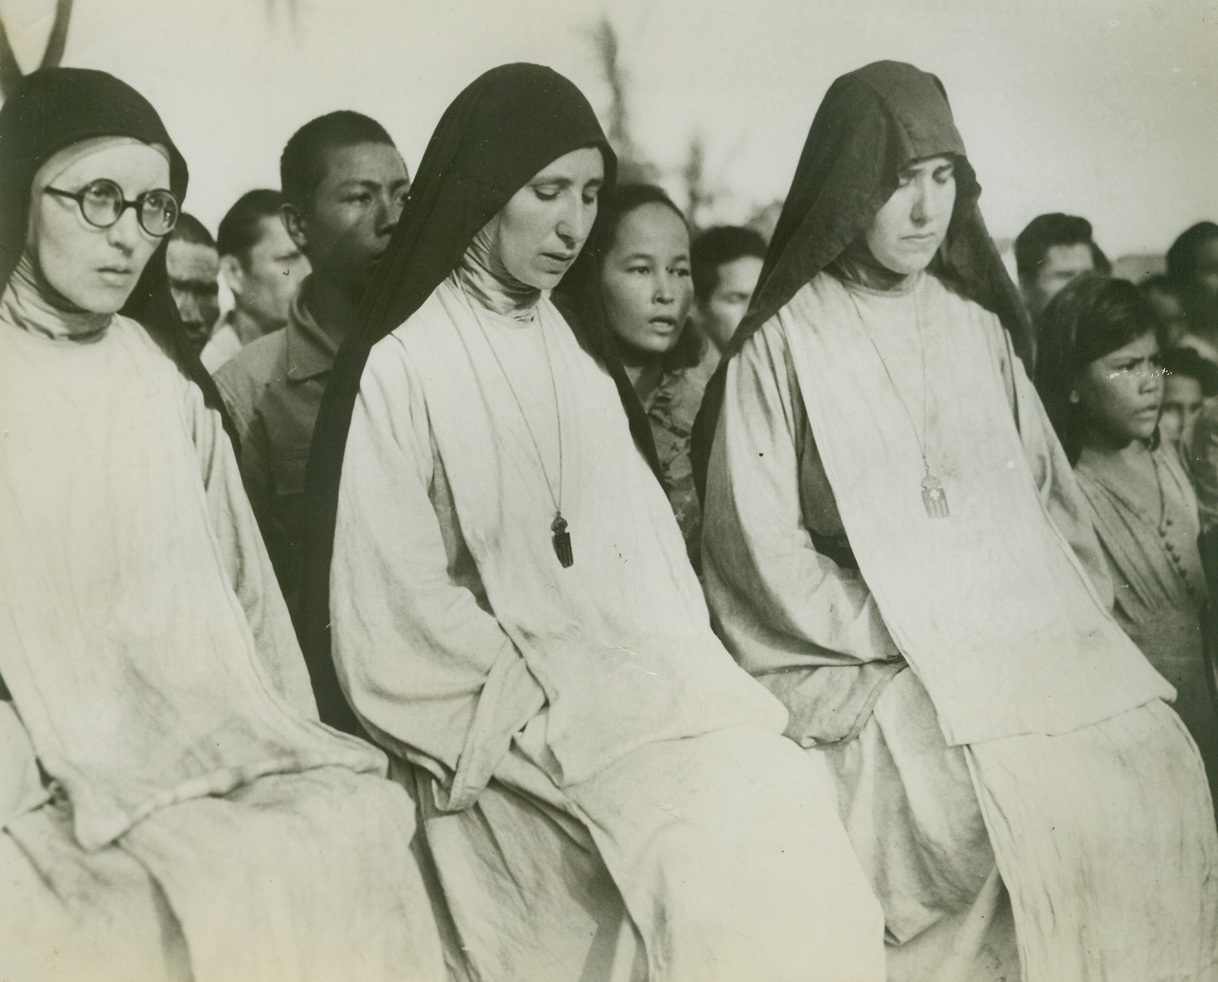 NUNS ATTEND FIRST MASS ON LIBERATED SAIPAN, 8/1/1944. SAIPAN ISLAND—Catholic nuns attend the first Mass held on Saipan since 1940, when the Japanese abolished Christian rites. Attending Mass with them are other civilians freed from the Japs by the capture of Saipan by the U.S. “triphibian” (air-land-sea) forces.Credit: Official U.S. Navy photo from Acme;